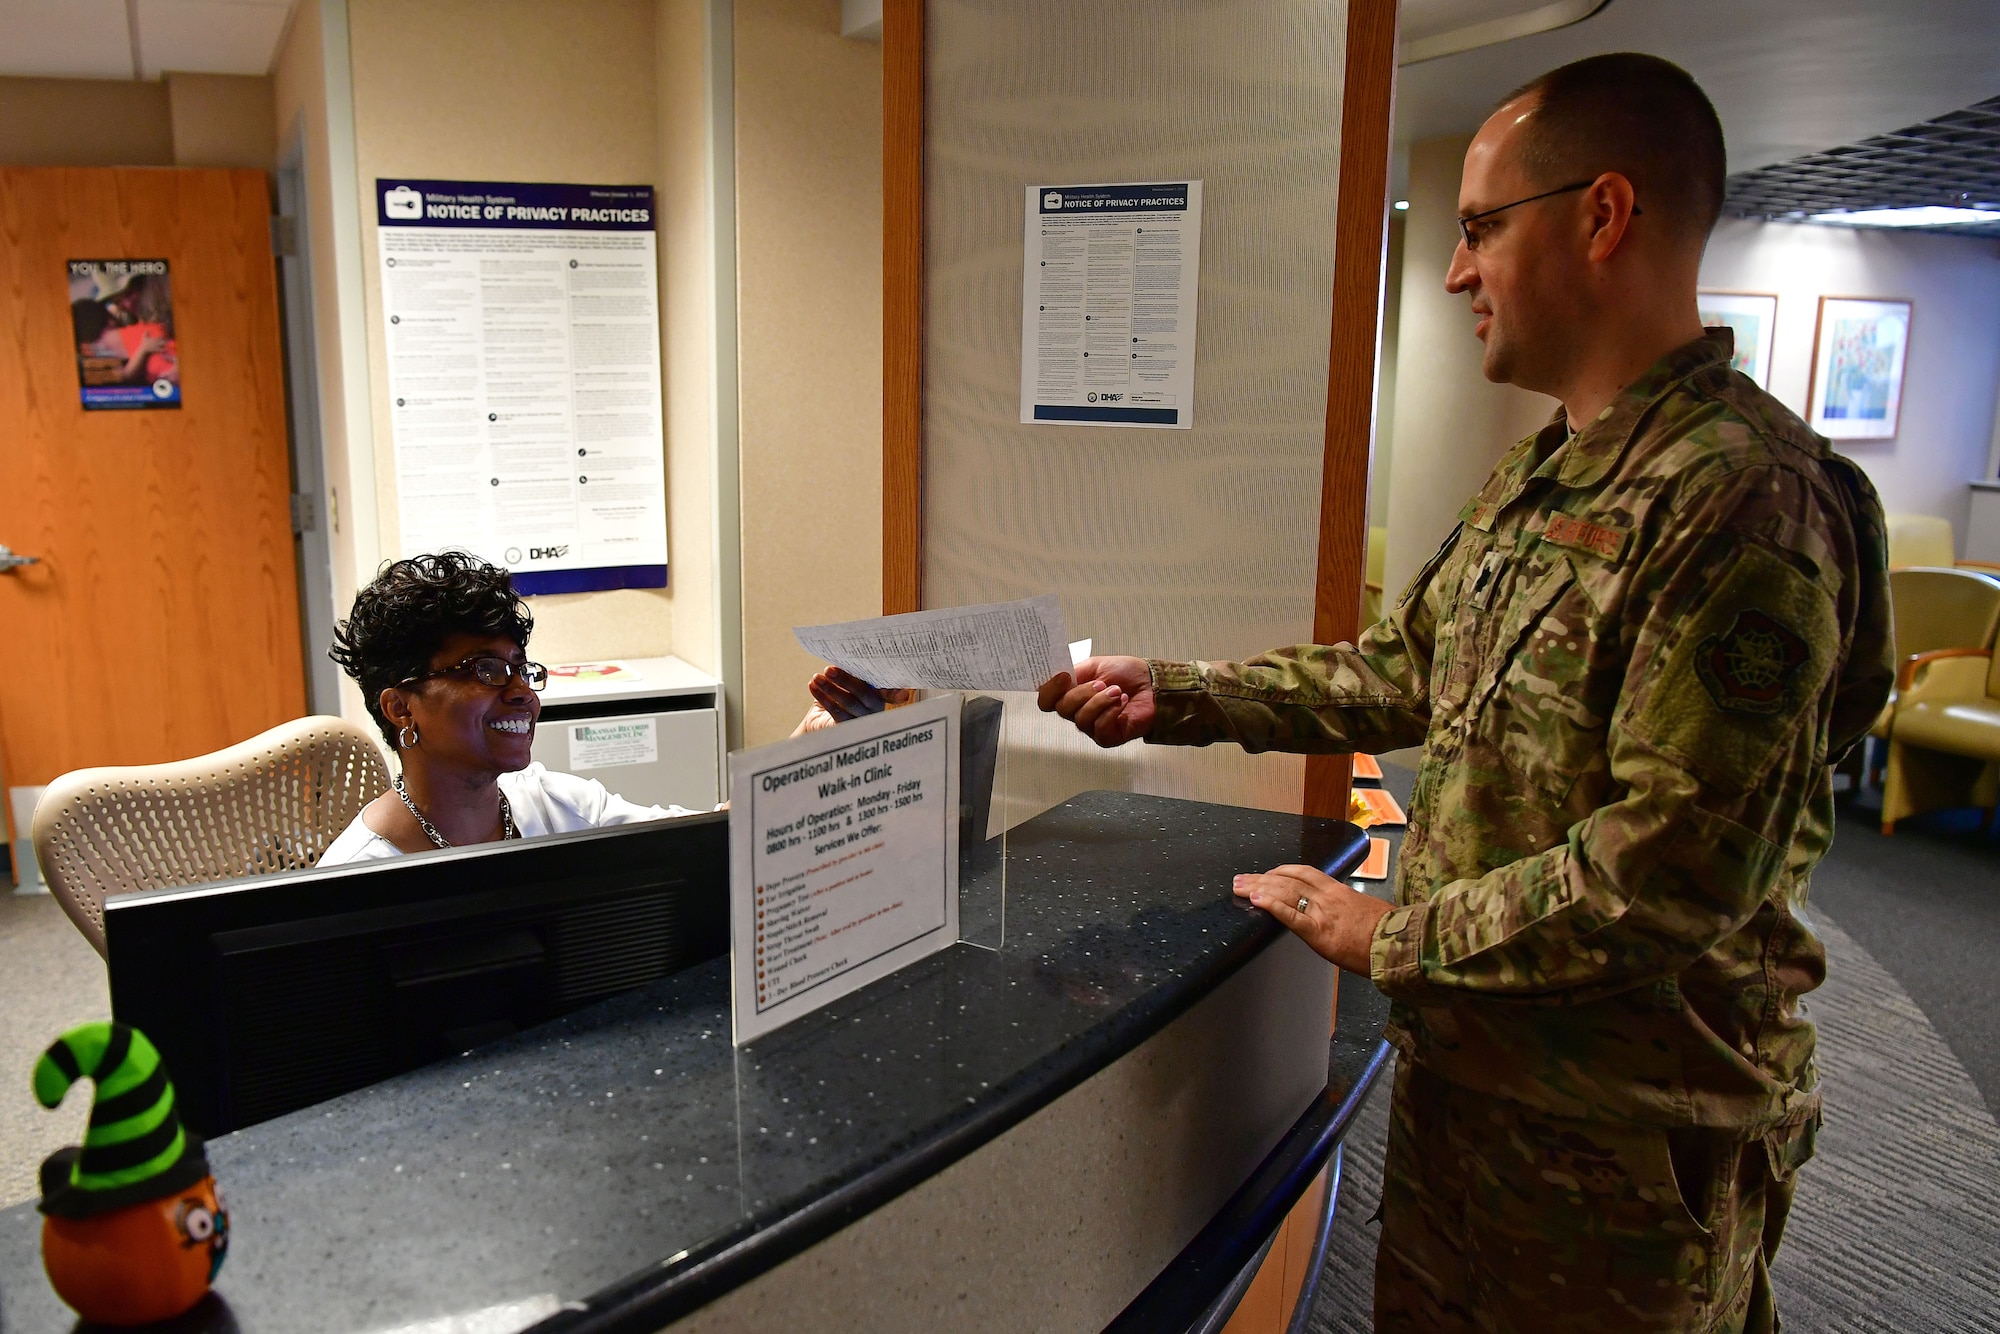 Lt. Col. Micah Schmidt, 19th Medical Group chief of medical staff, demonstrates checking in for an appointment.